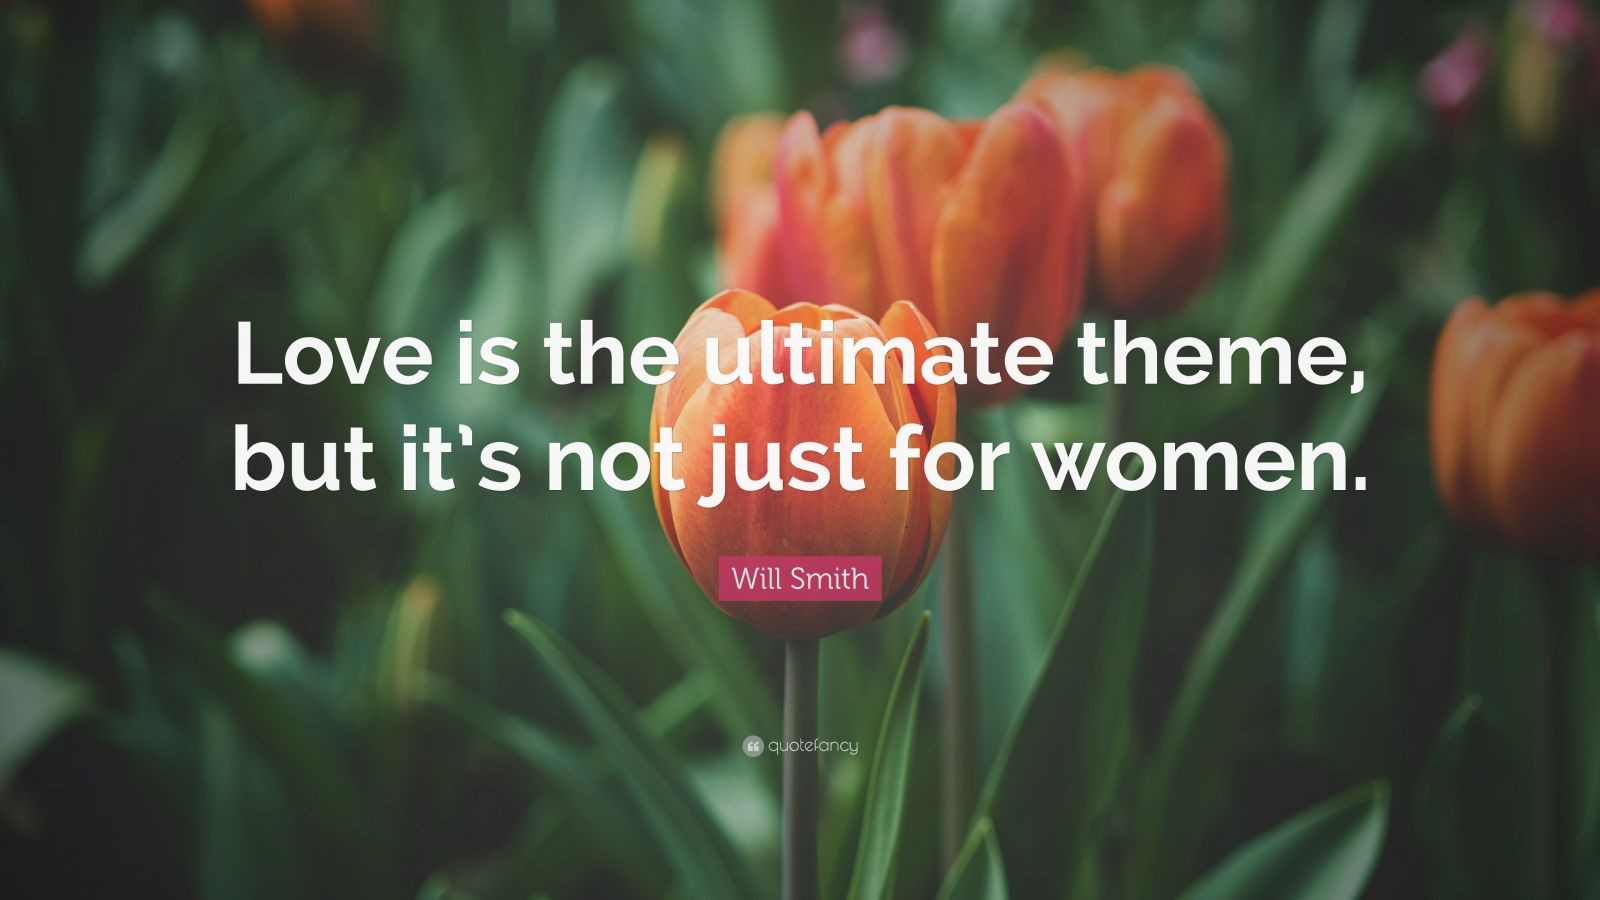 Will Smith Quote “Love is the ultimate theme but it s not just for